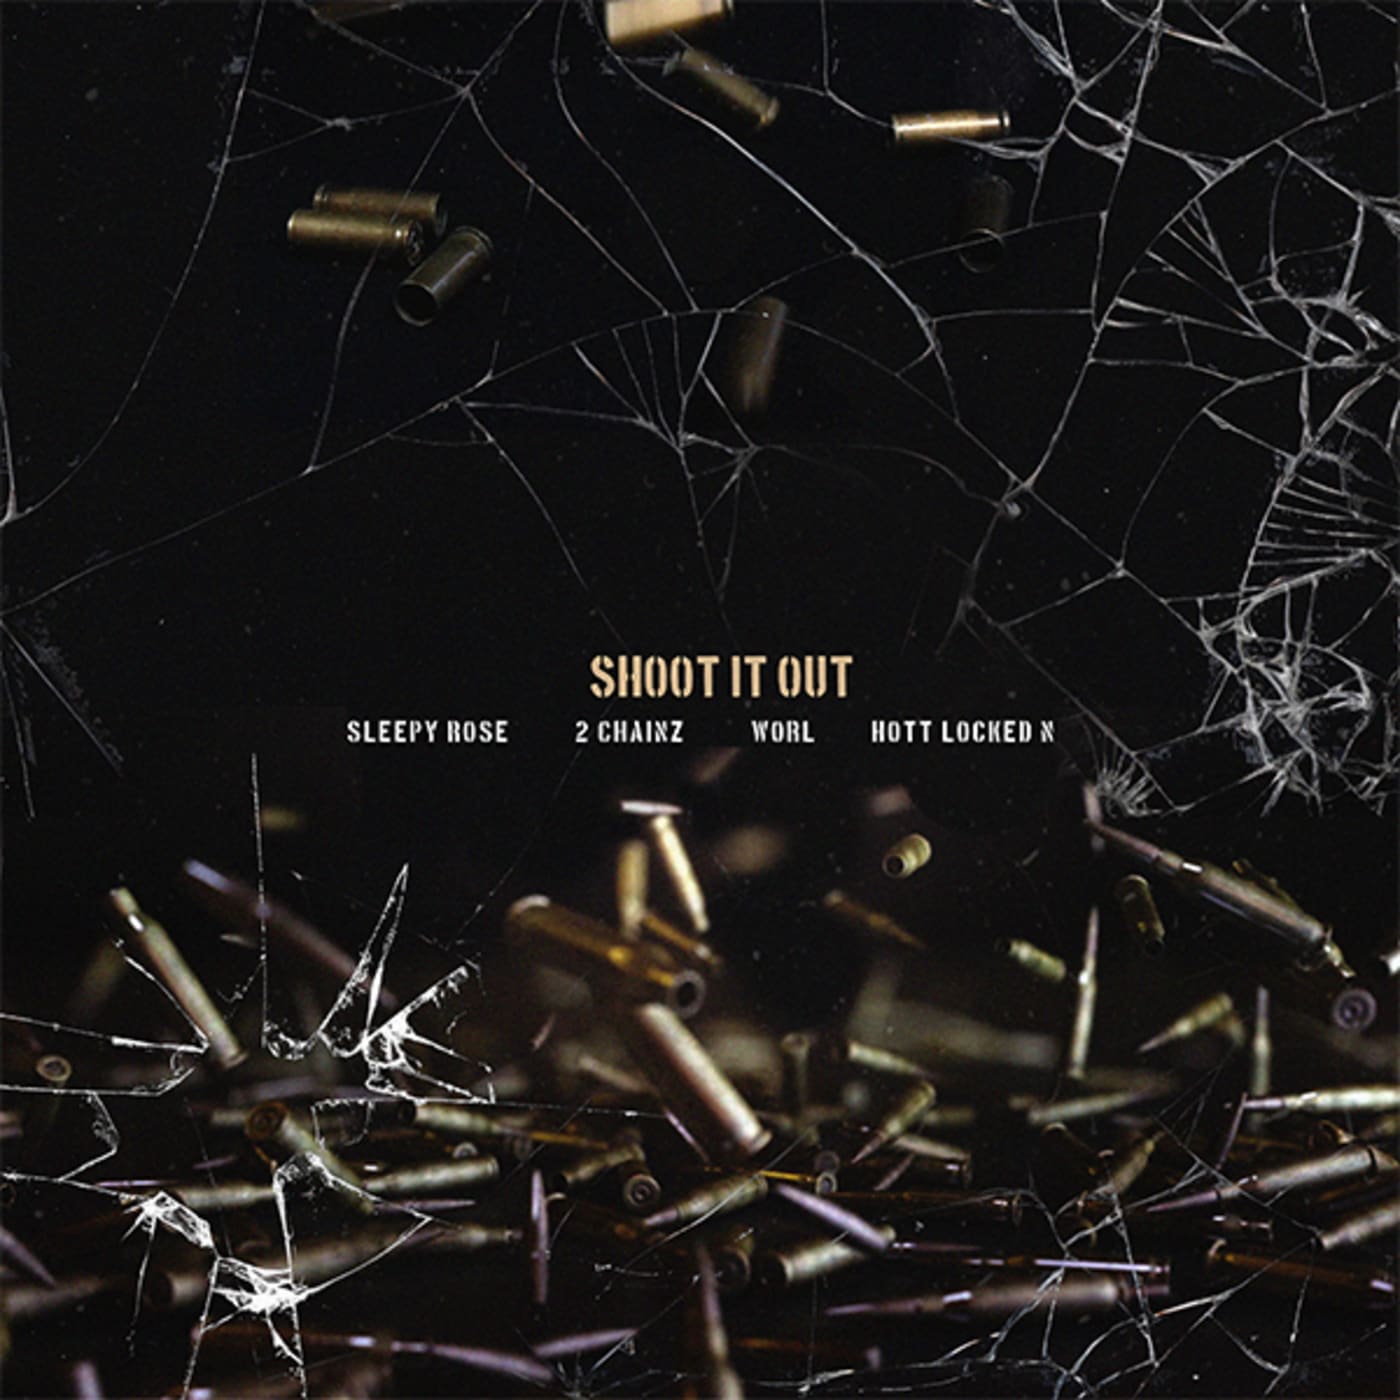 This is a photo of Shoot It Out artwork.